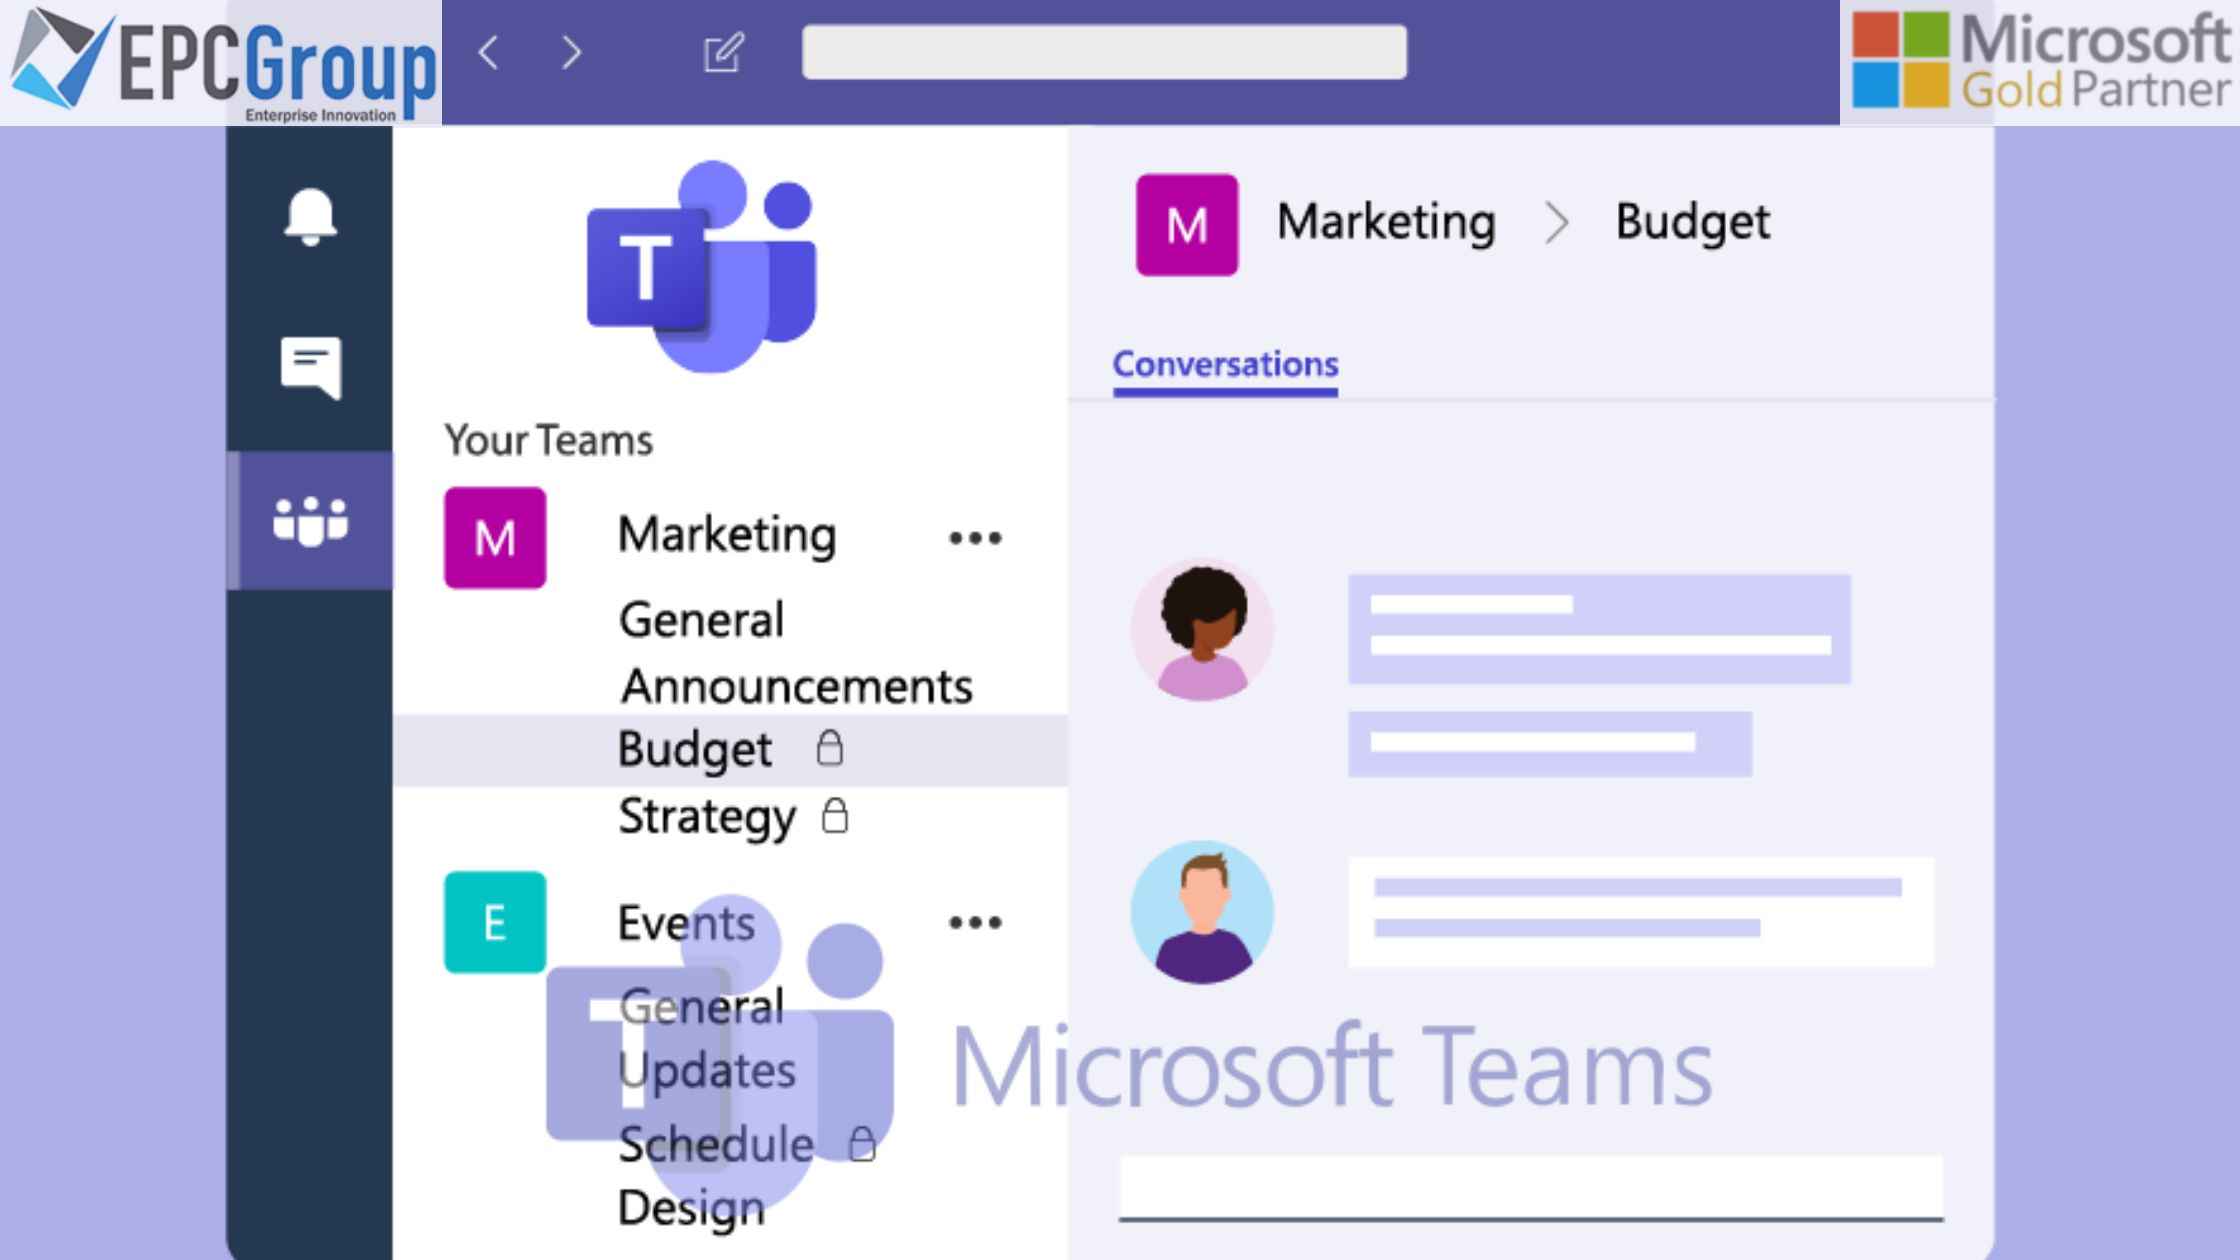 How to Create and Manage Microsoft Teams Channels: A Step-by-Step Guide - thumb image